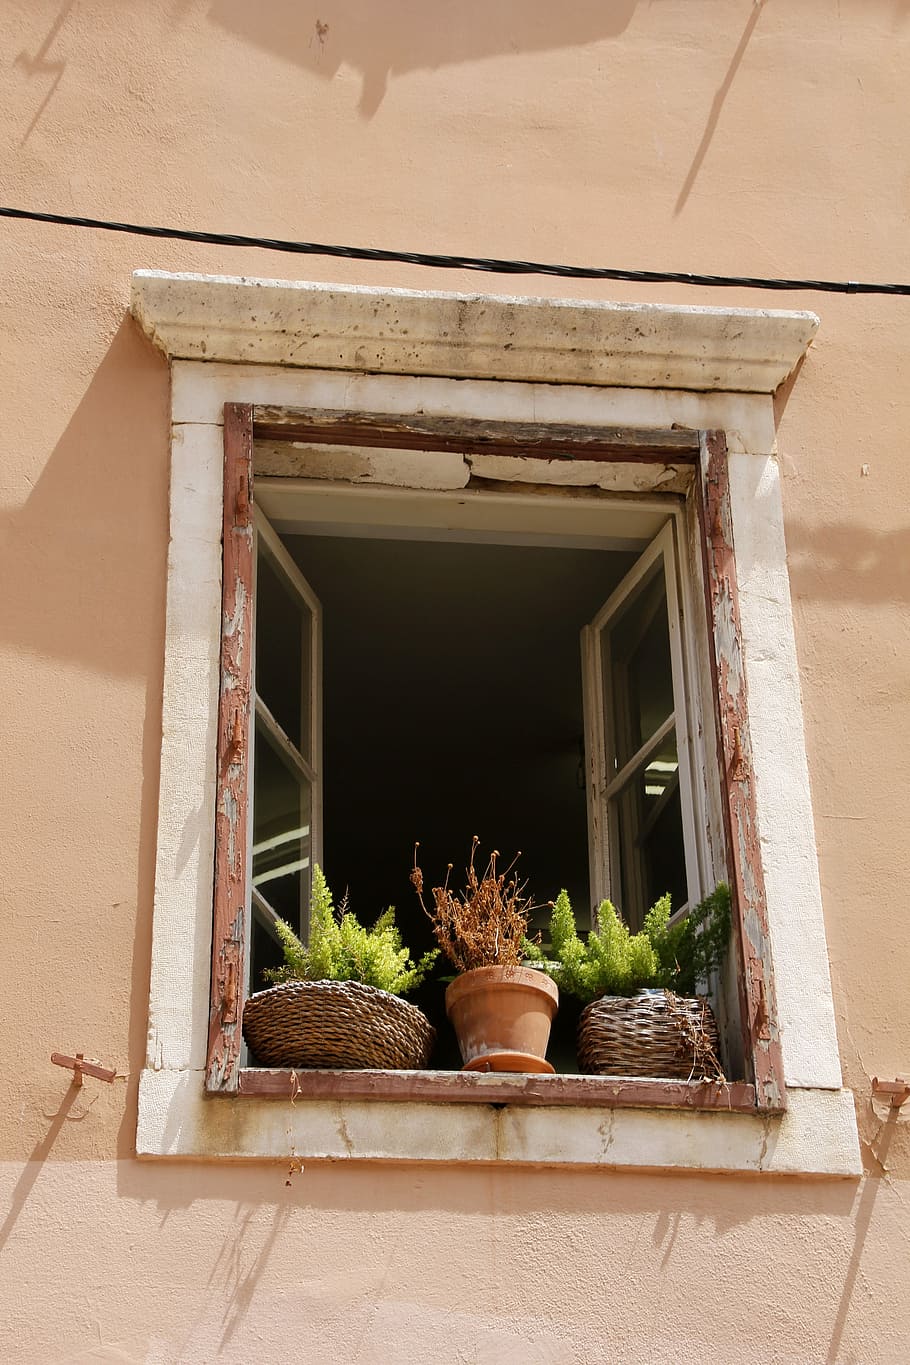 Window, Plant, Old, Idyll, window, plant, potted plant, window sill, home interior, indoors, architecture